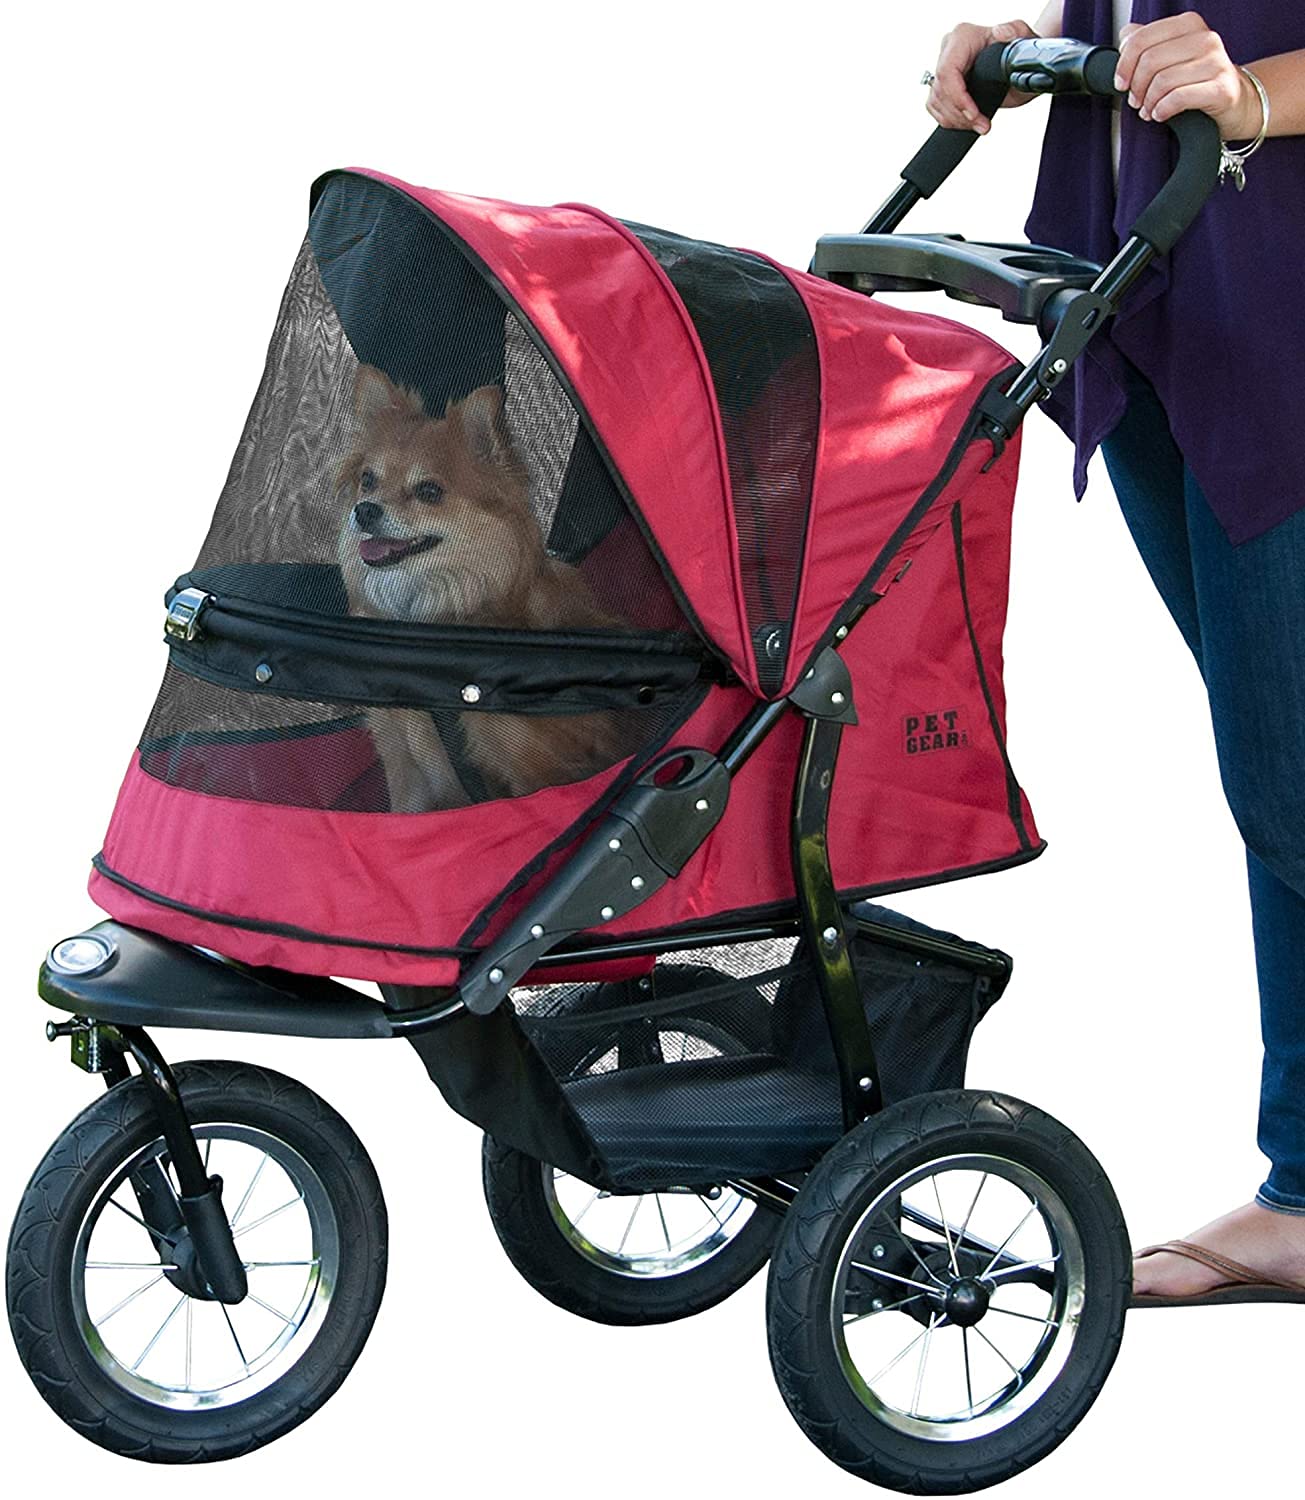 Pet gear No-Zip AT3 Pet Stroller for catsDogs Zipperless Entry Easy One-Hand Fold Jogging Tires Removable Liner cup Holder + Sto